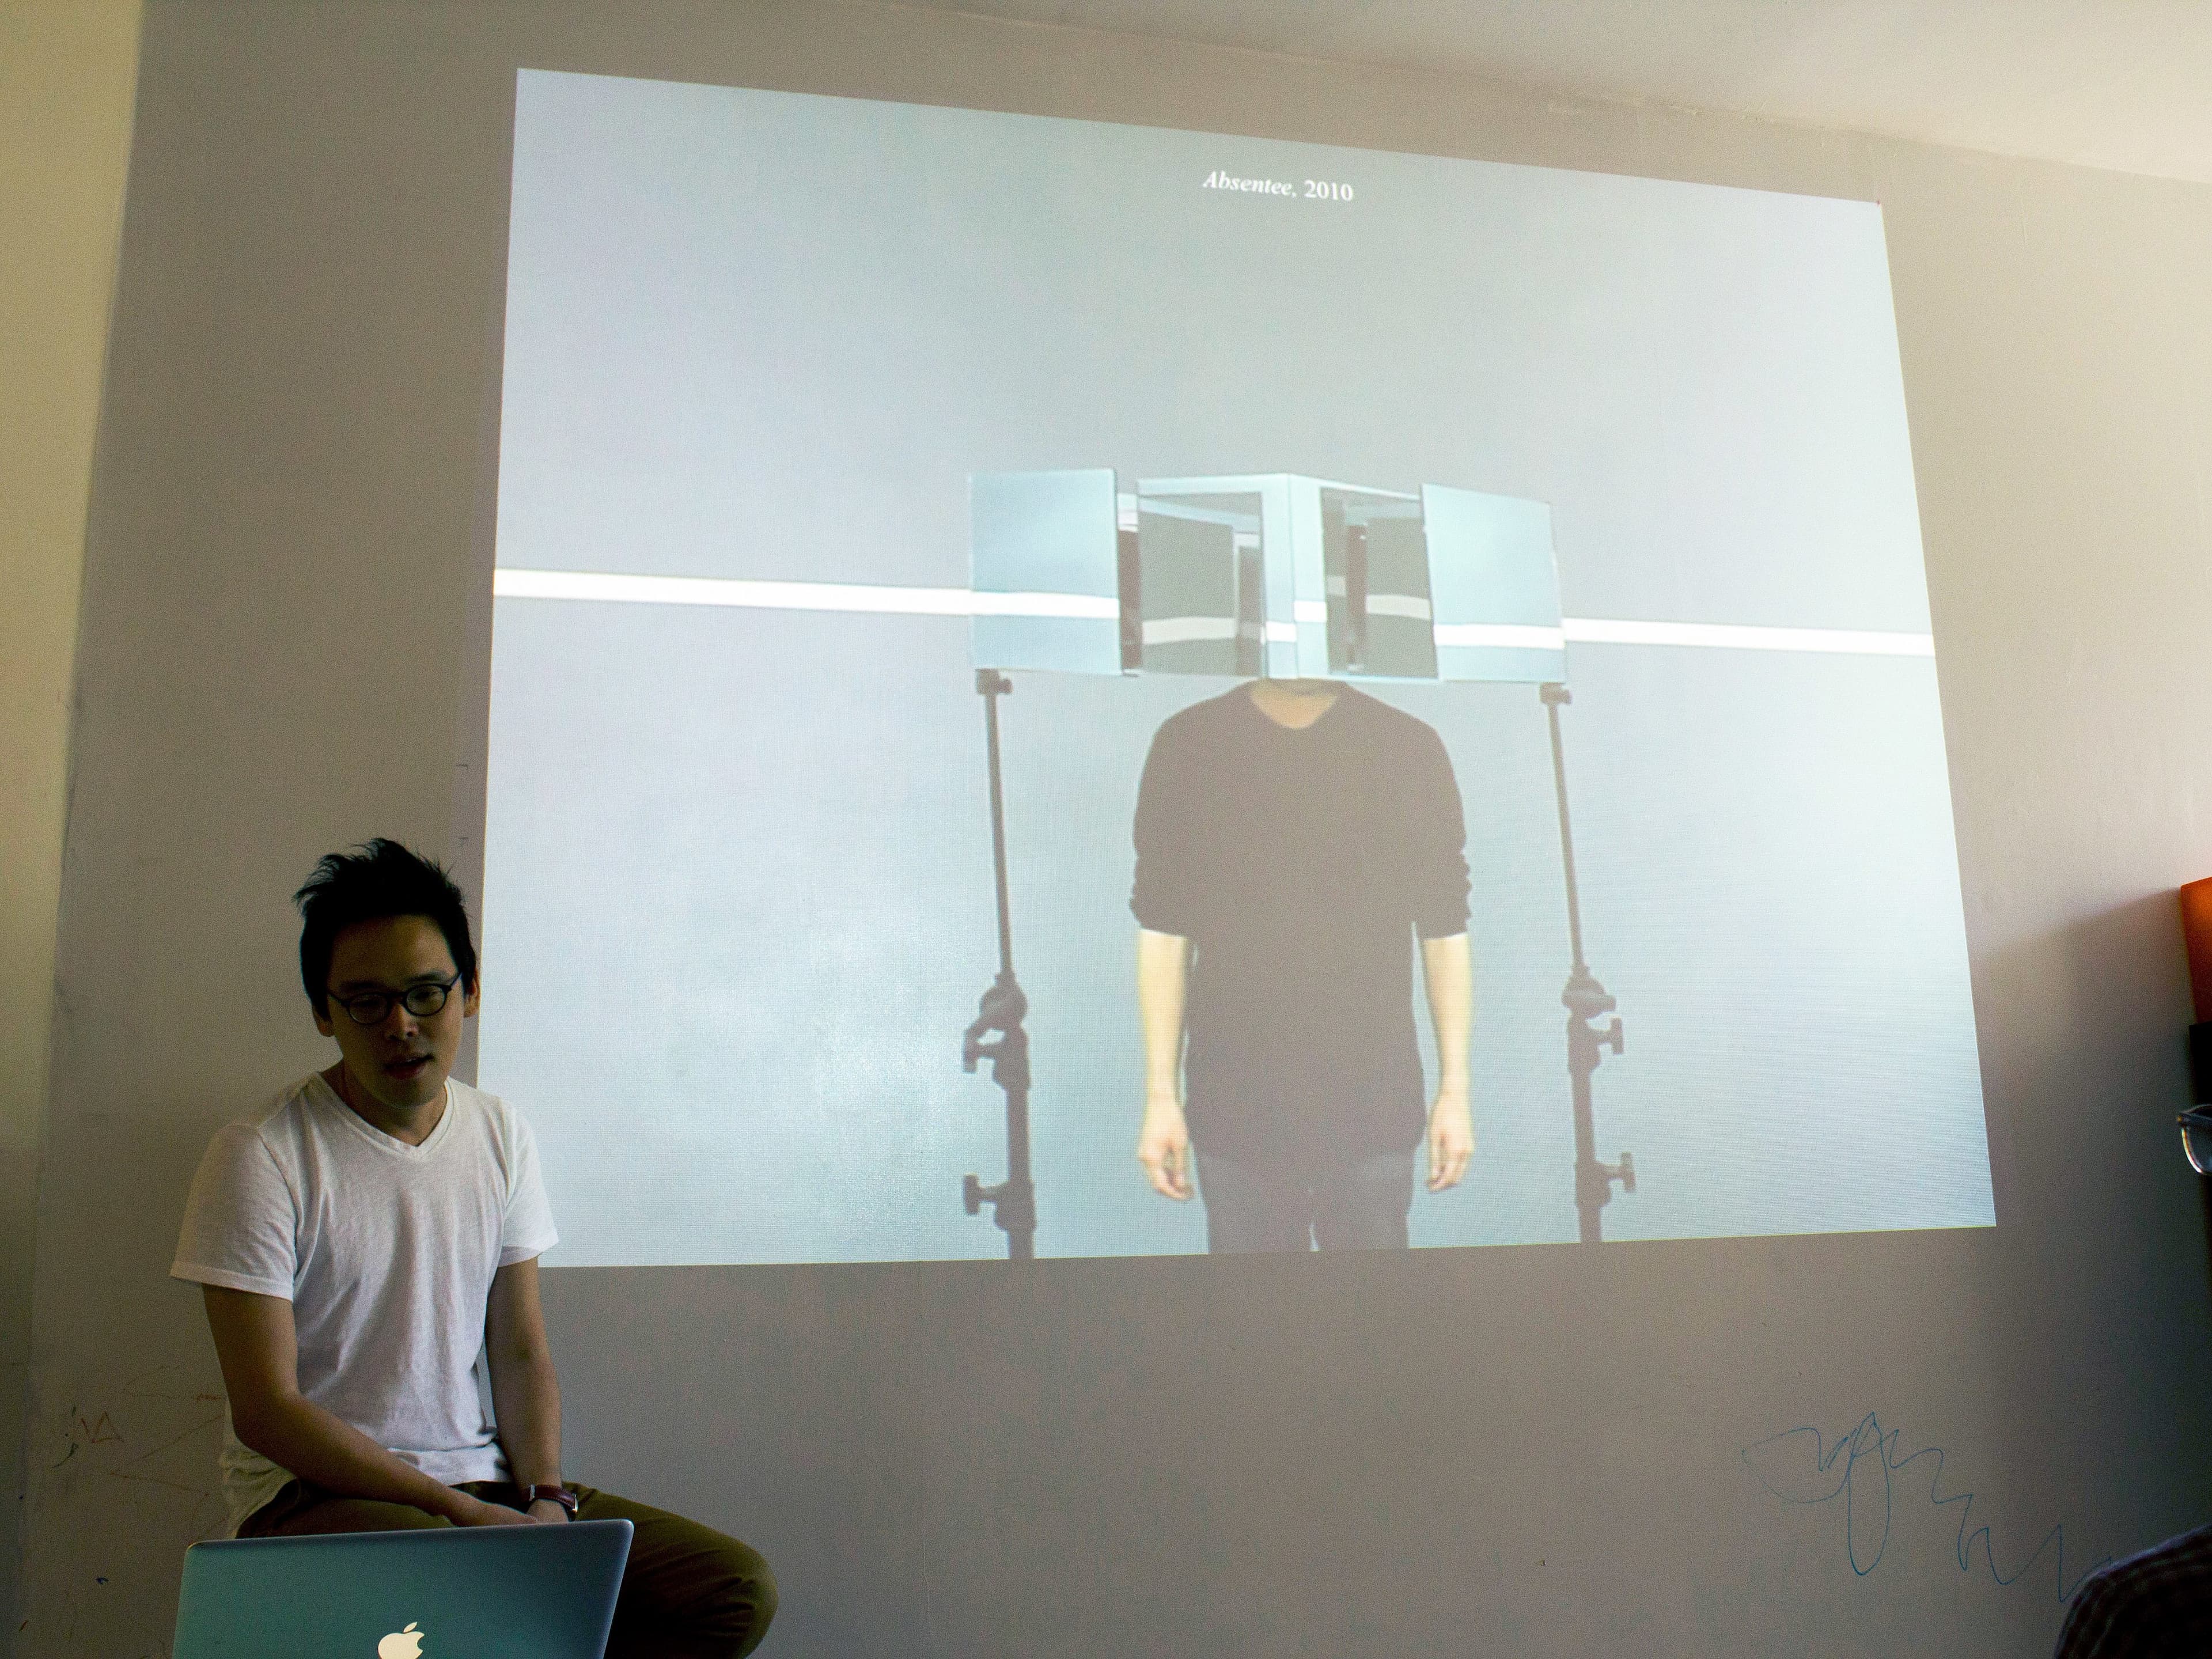 A person in a white t-shirt sits near a laptop, presenting to an audience. Behind them, a large screen displays an art installation featuring a person with square mirrors covering their head. The artwork is titled "Mirrors, 2010.